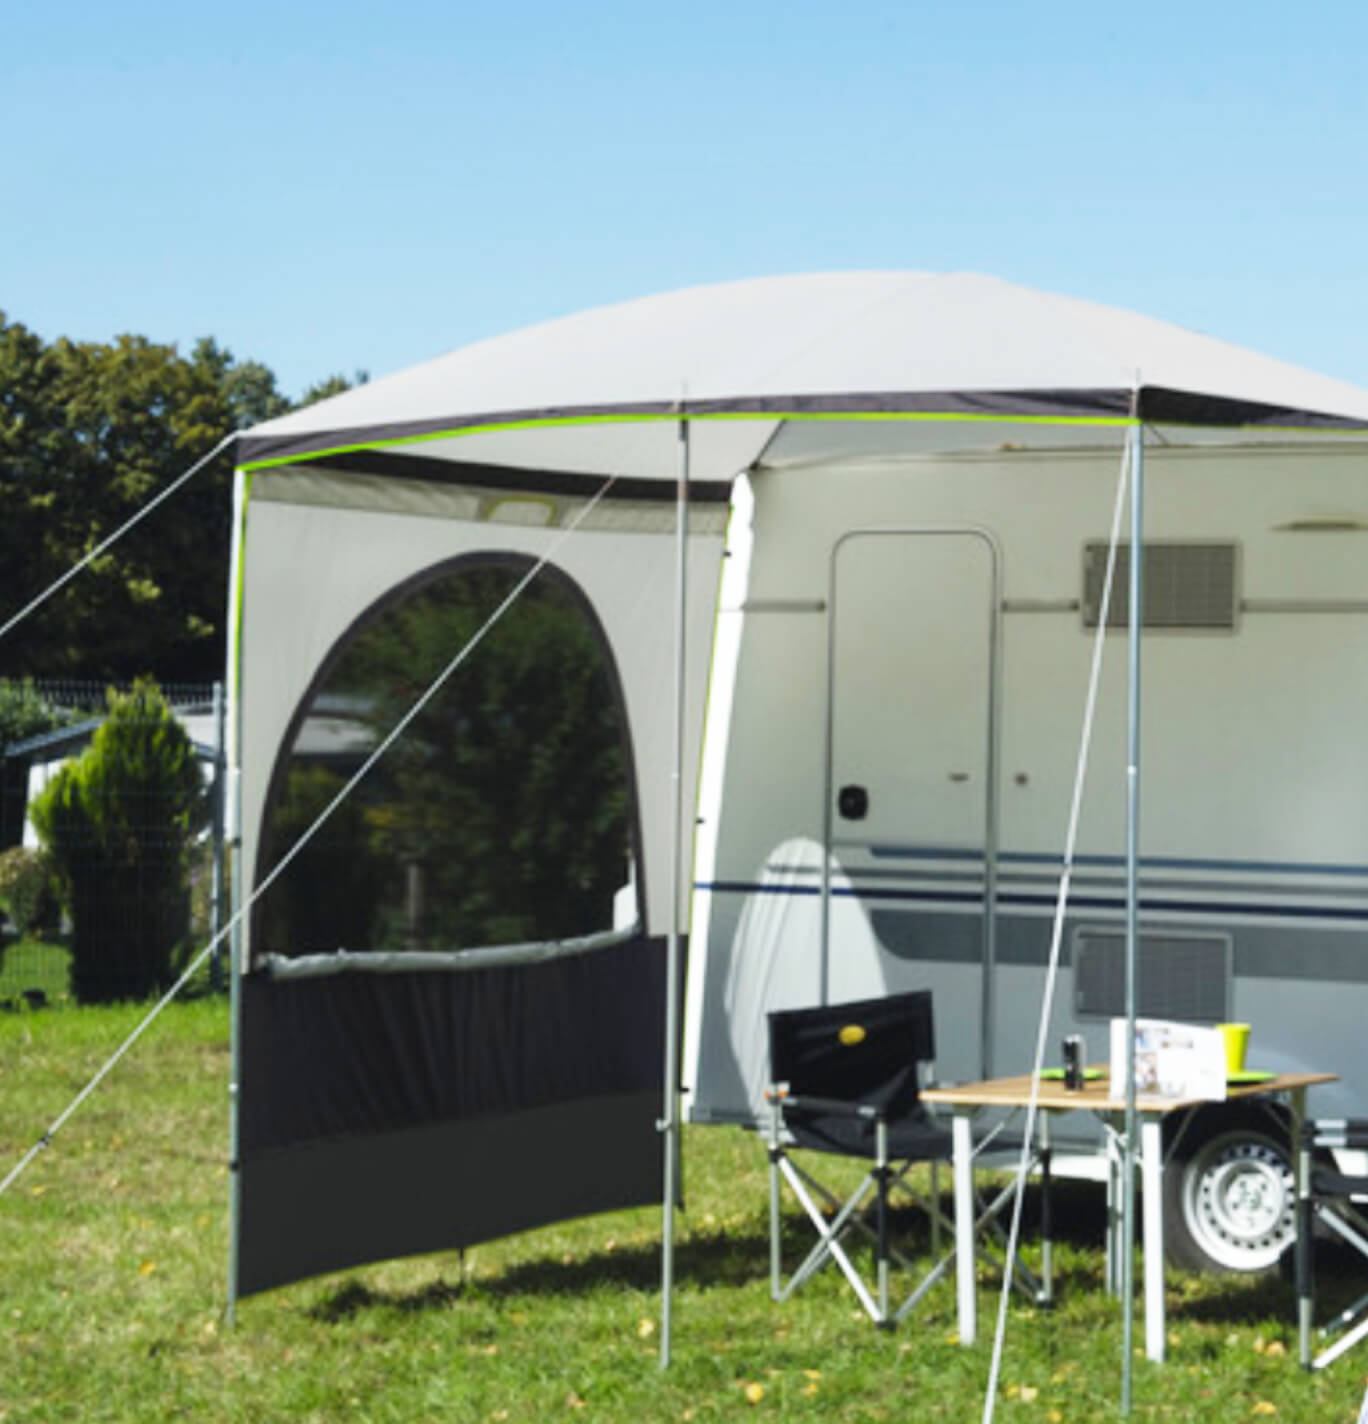 Reimo Palm Beach 2 LWB Side Wall For LWB Sun Canopy | Campers & Caravans Image